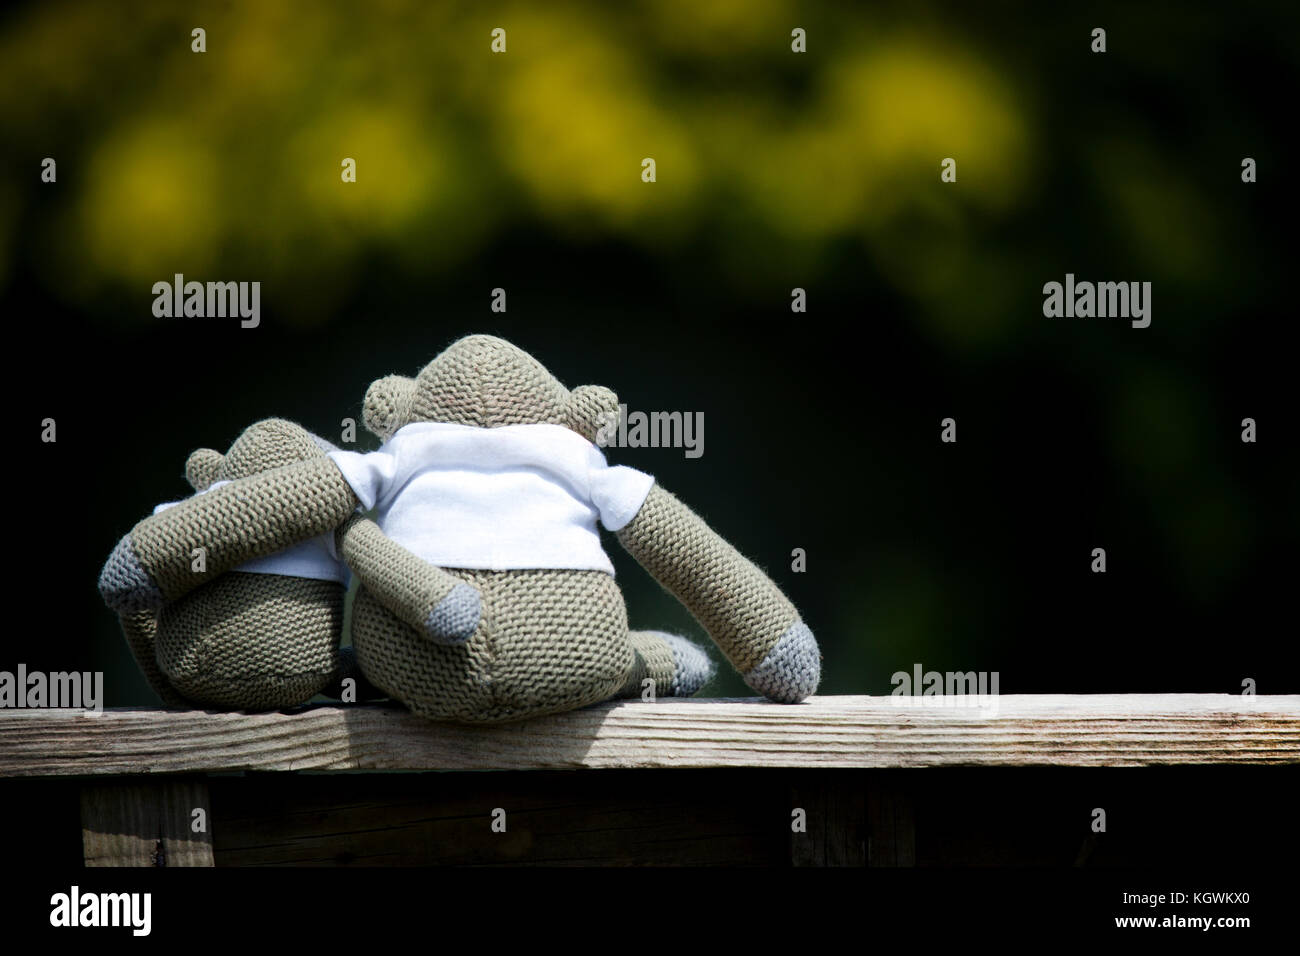 Two toy monkeys, one larger than the other, sat cuddling on a wooden bench with their arms around each other Stock Photo